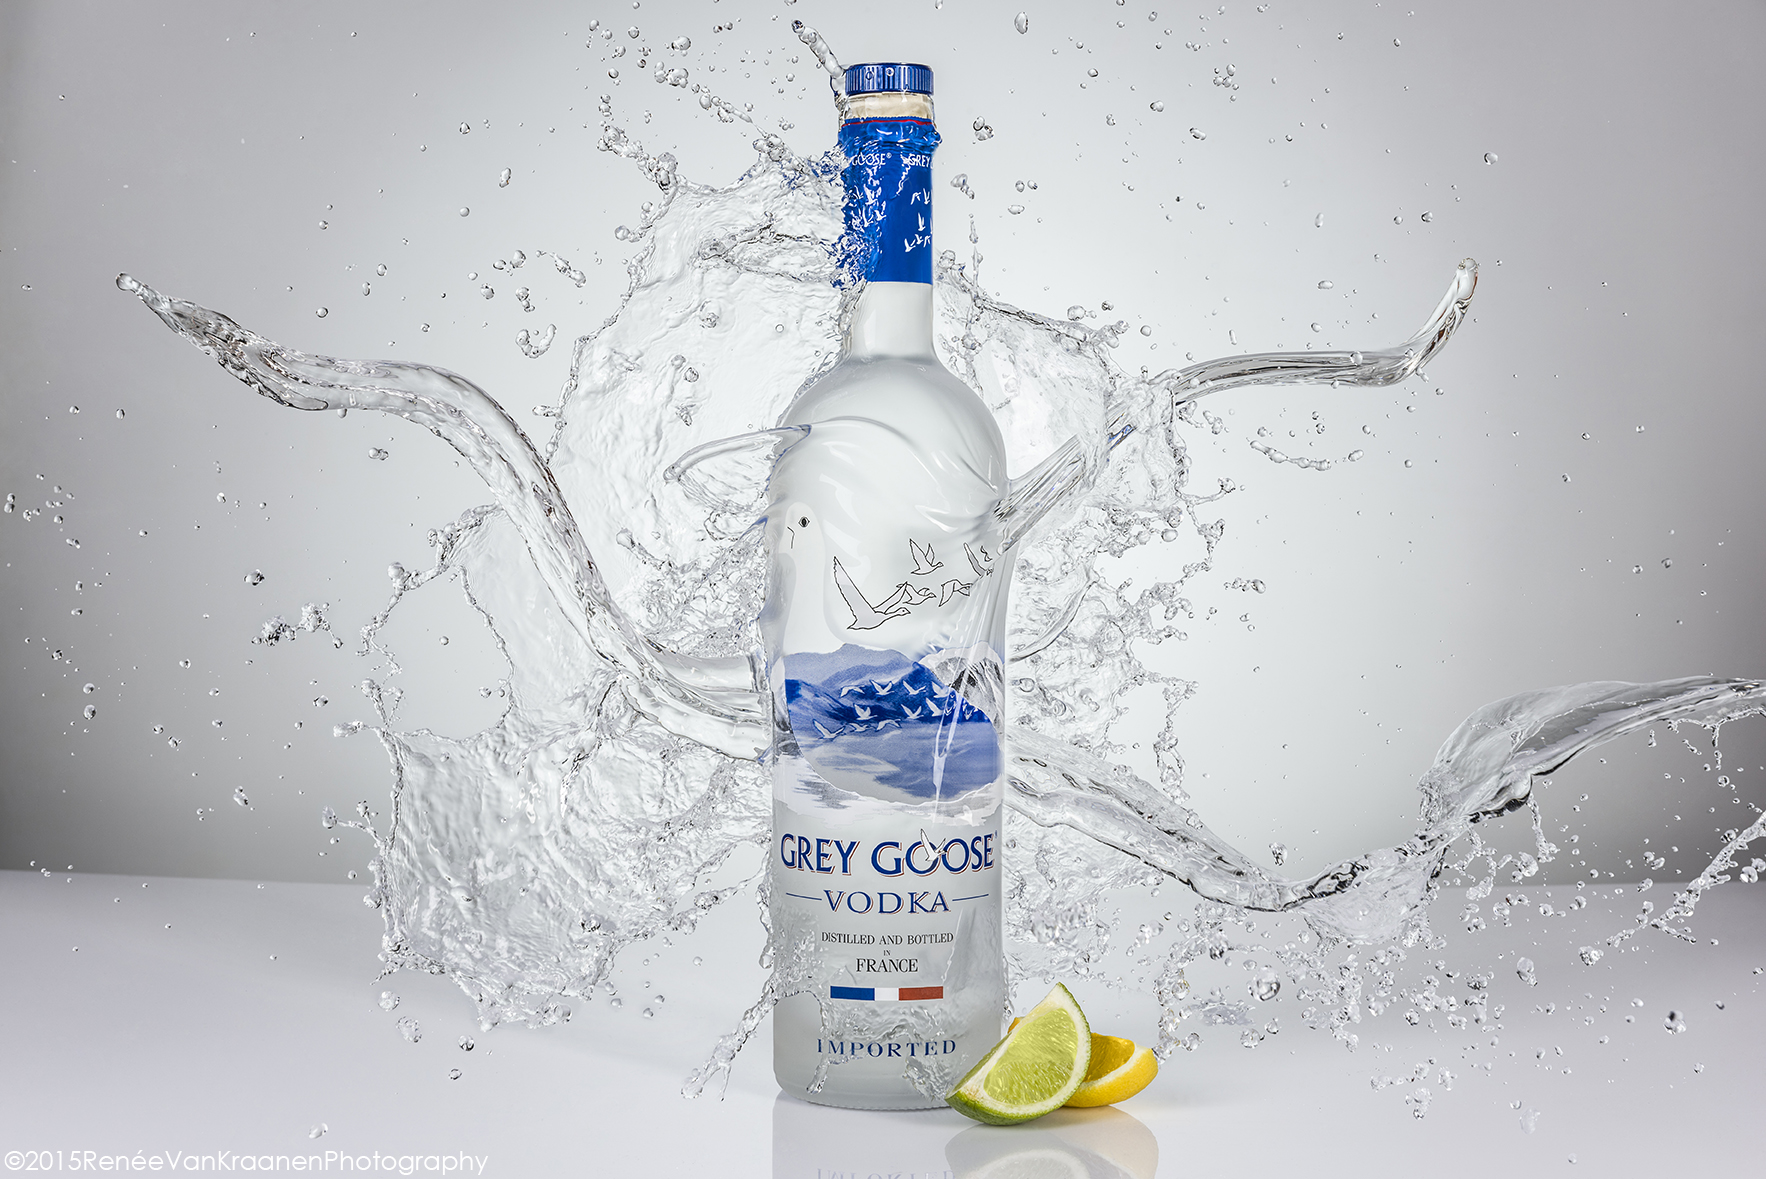 Grey Goose Vodka Product Shot on a white background, there is clear liquid splashing onto the bottle, a wedge of lime and lemon are at the base of the bottle.